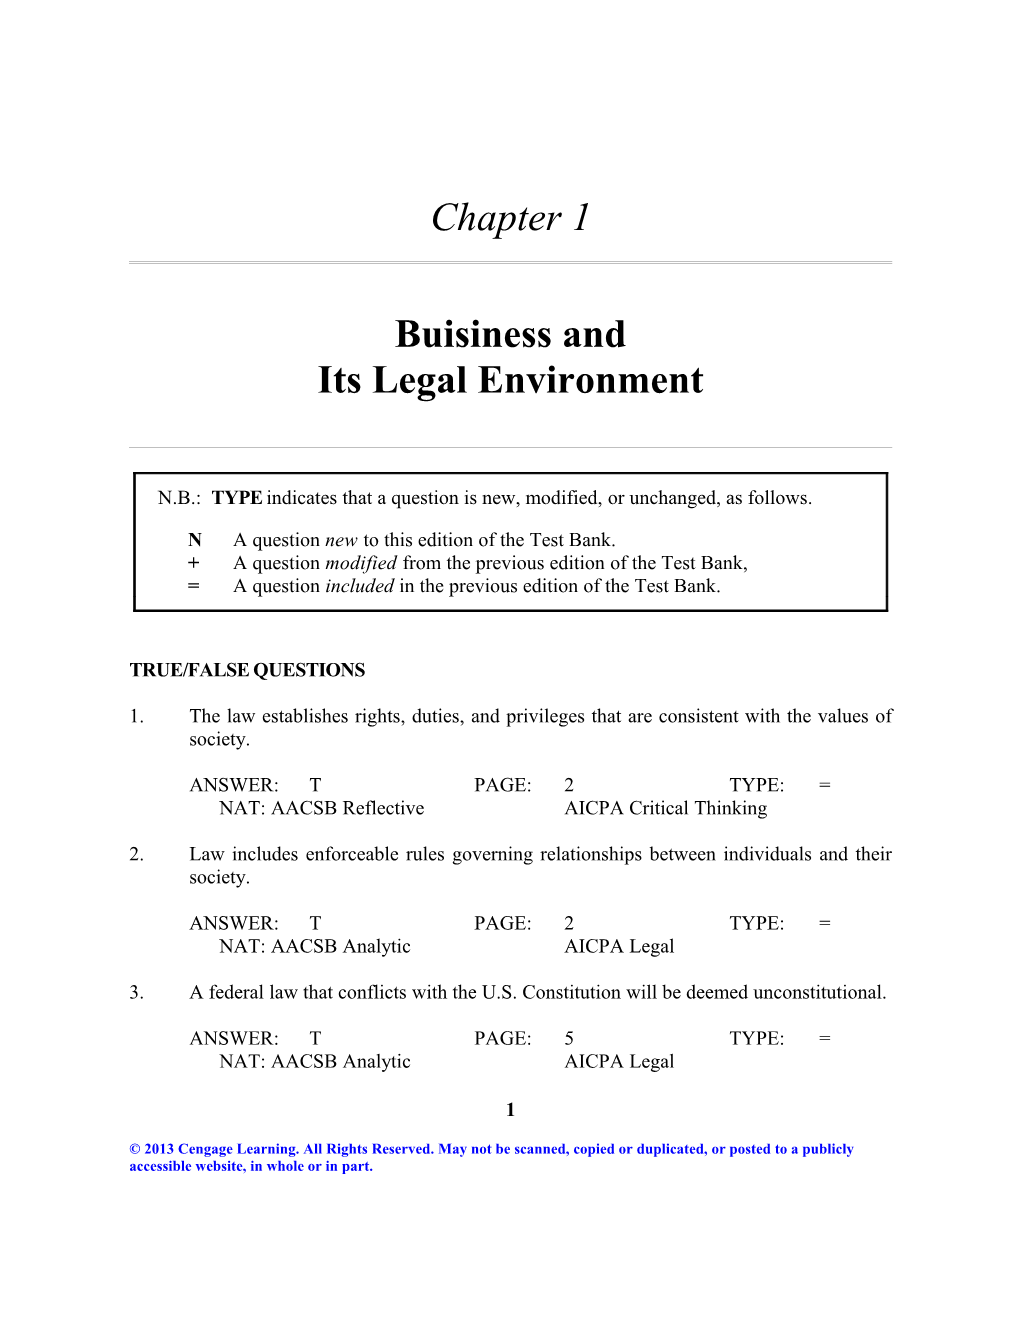 Chapter 1: Business and Its Legal Environment 17